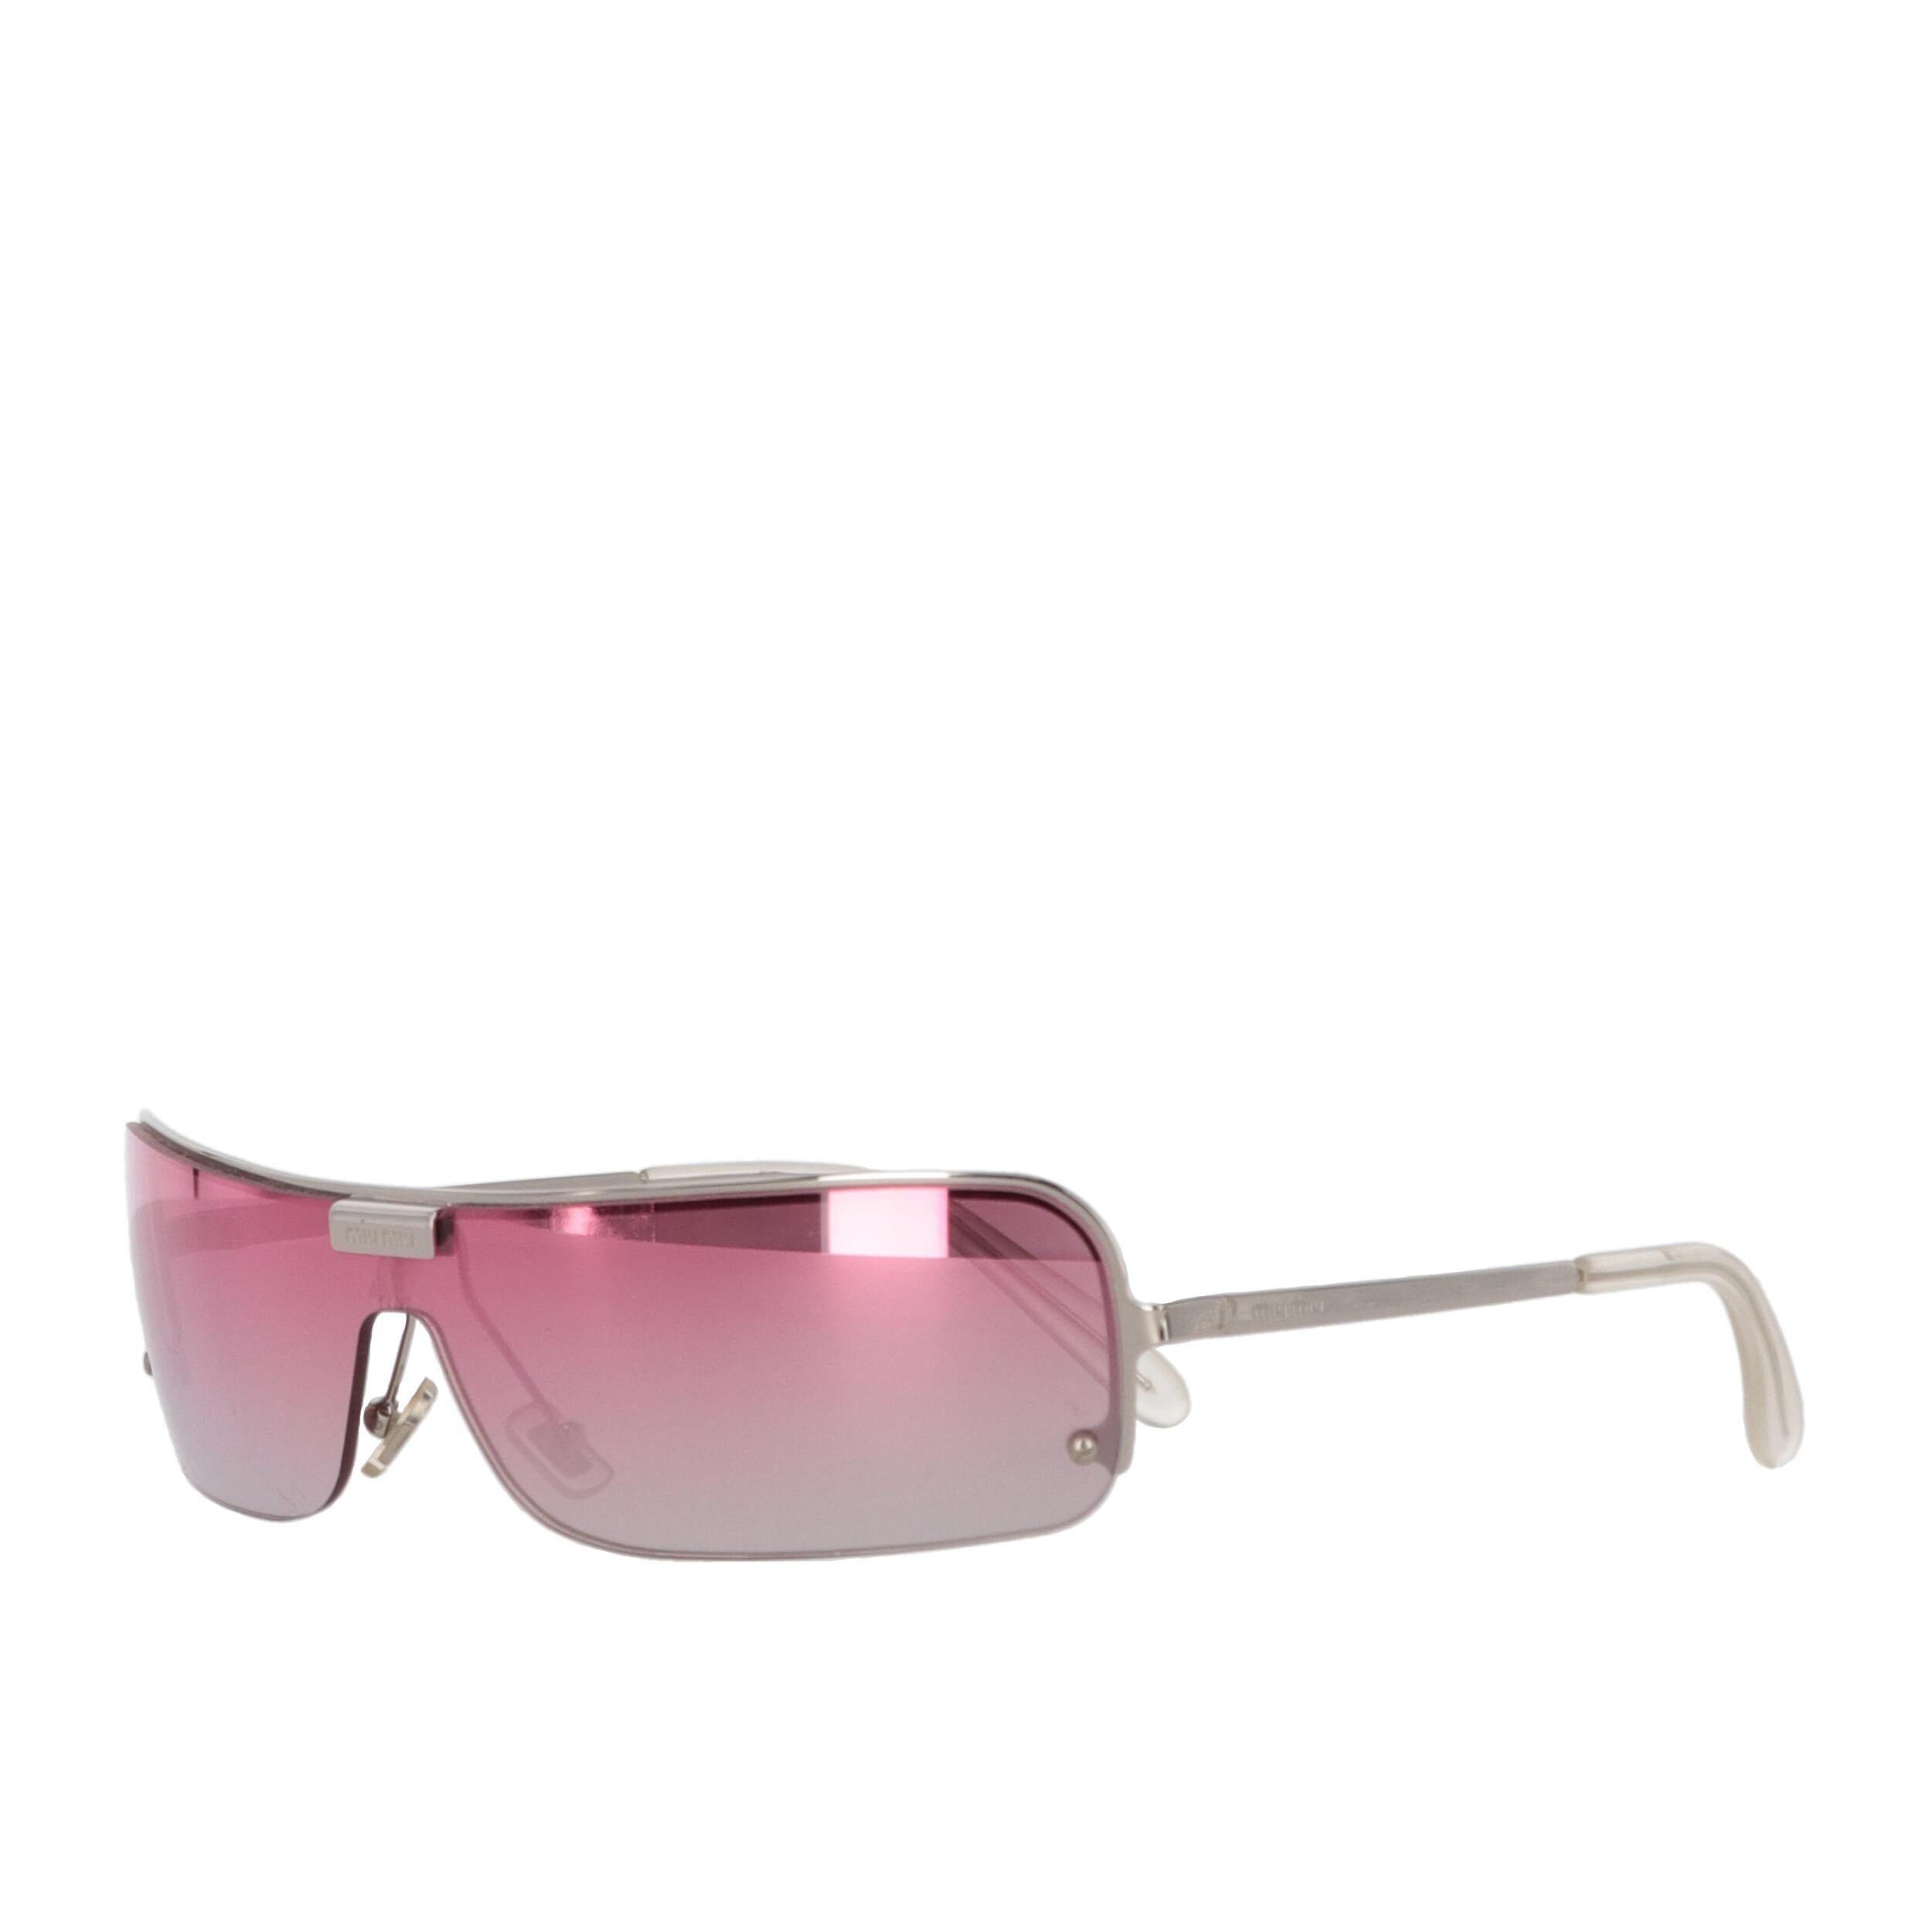 Miu Miu silver-tone frame and temples mask sunglasses with pink lenses.

Please note, this item cannot be shipped to the US.

Years: 2000s

Made in Italy

Width: 14 cm
Height: 3,5 cm